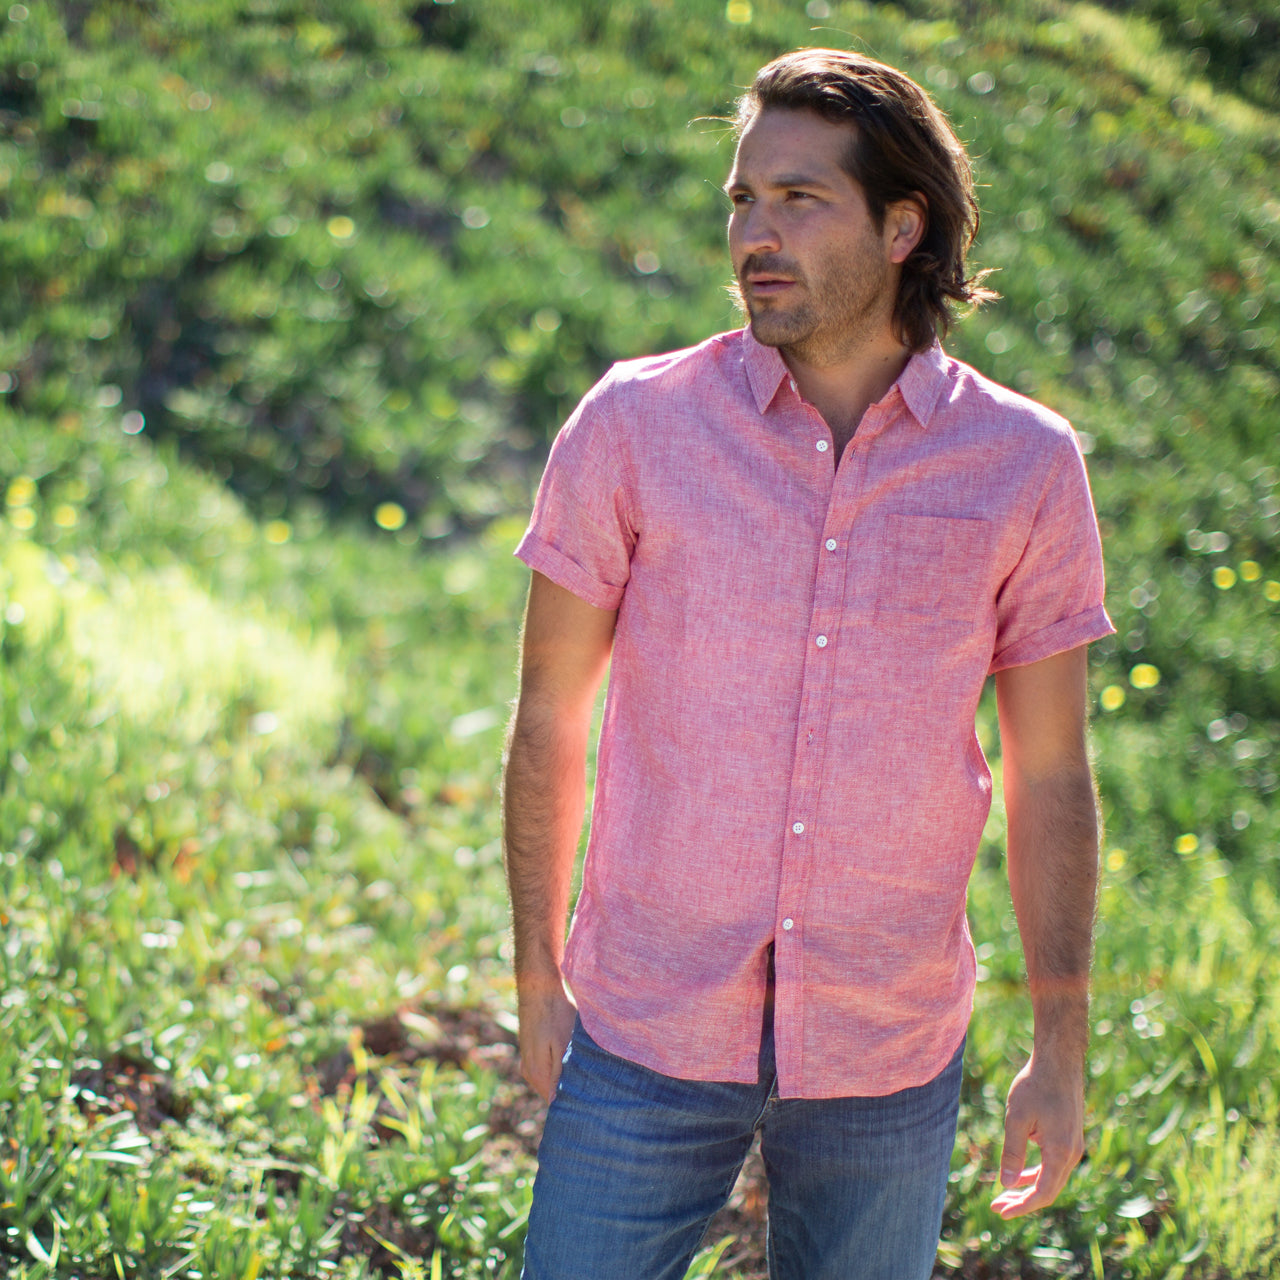 Men's Red Button Up Cotton Short Sleeve Shirt front view model shot in a field of grass